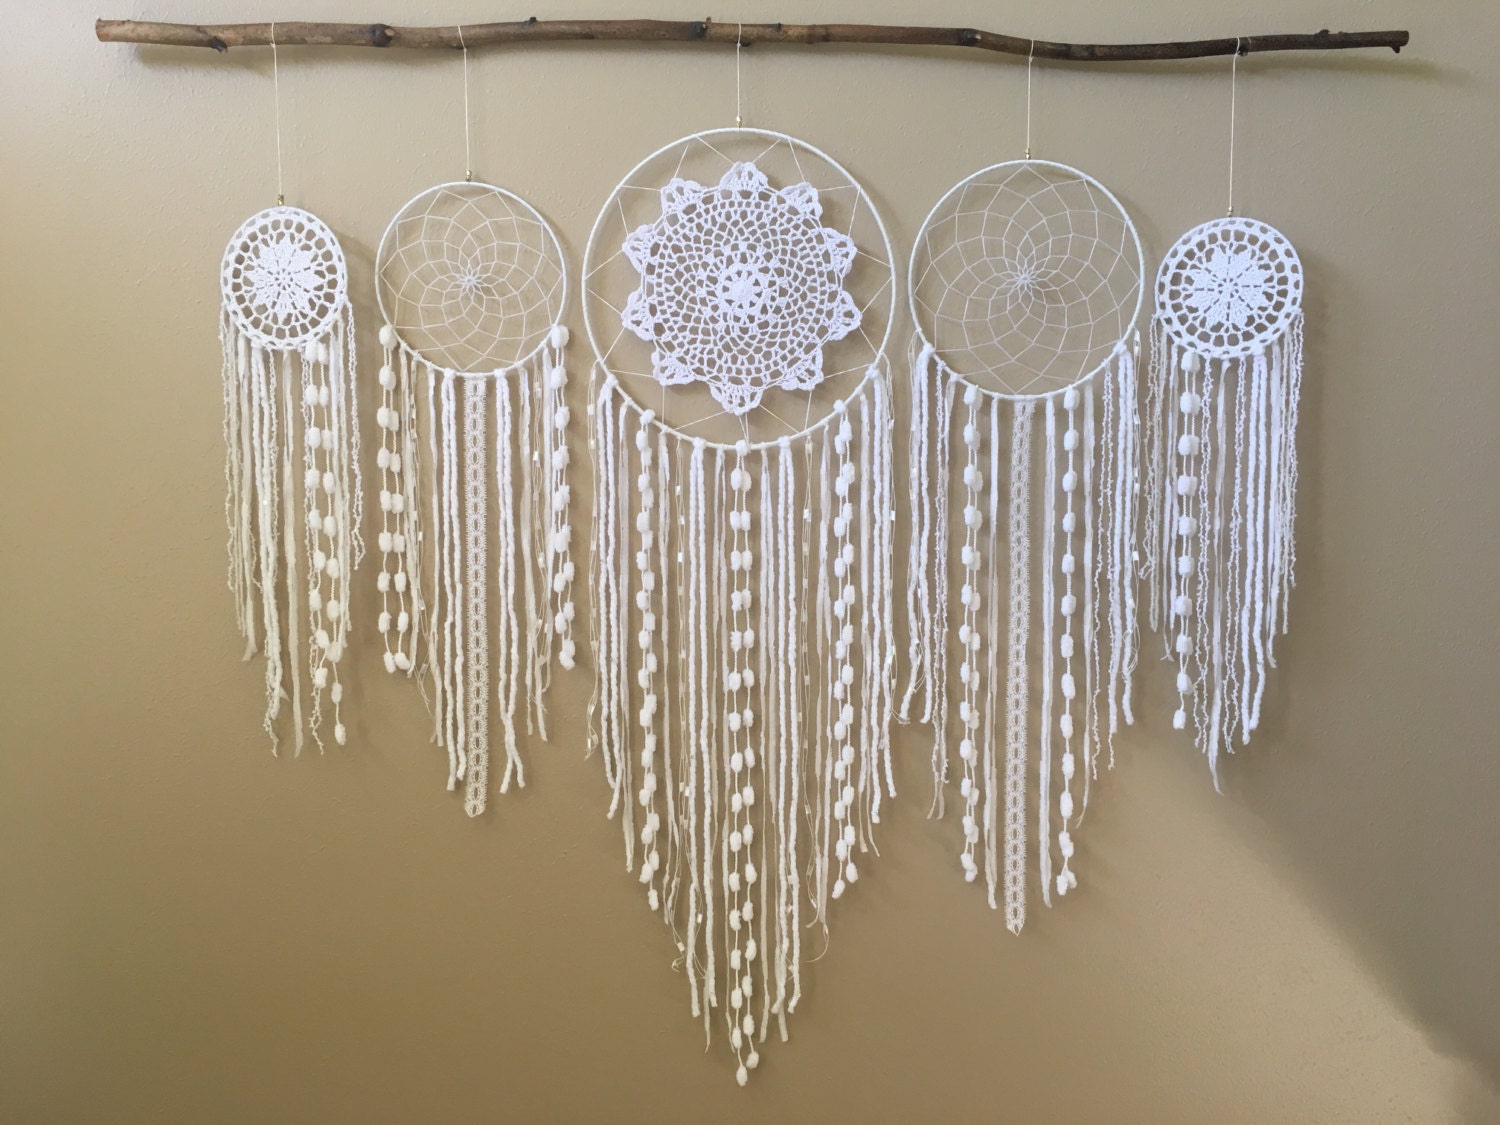 Dreamcatcher Wall Hanging Collection Set of 5 Dream Catchers